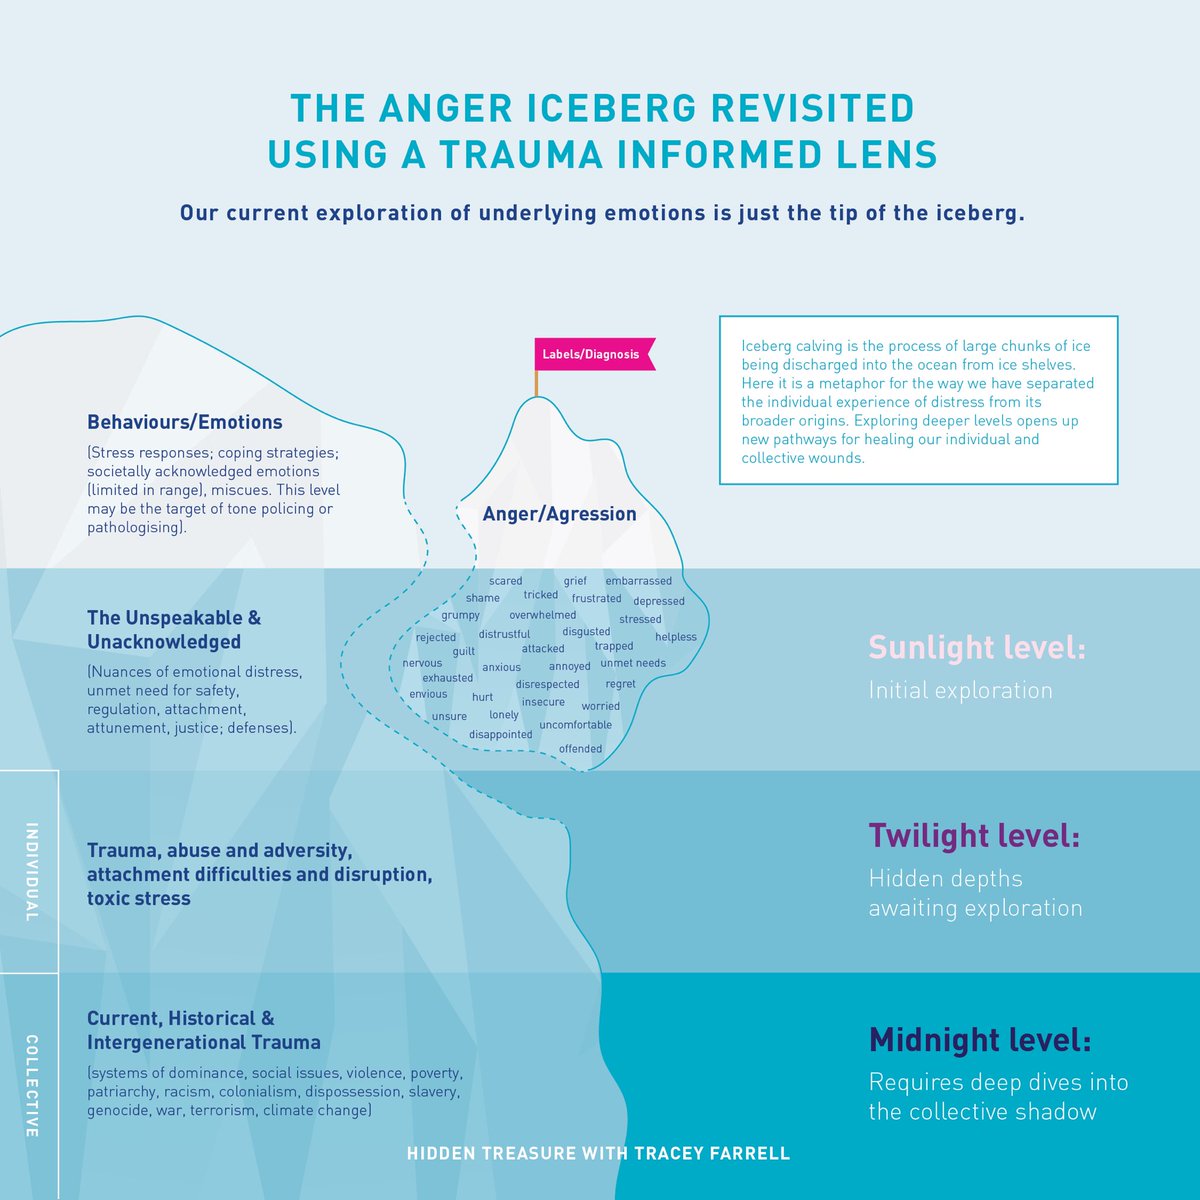 1. The Anger Iceberg has been a much needed acknowledgement that underneath visible behaviour and big emotion is other unexpressed emotion that can help us understand how to support a person in their distress.